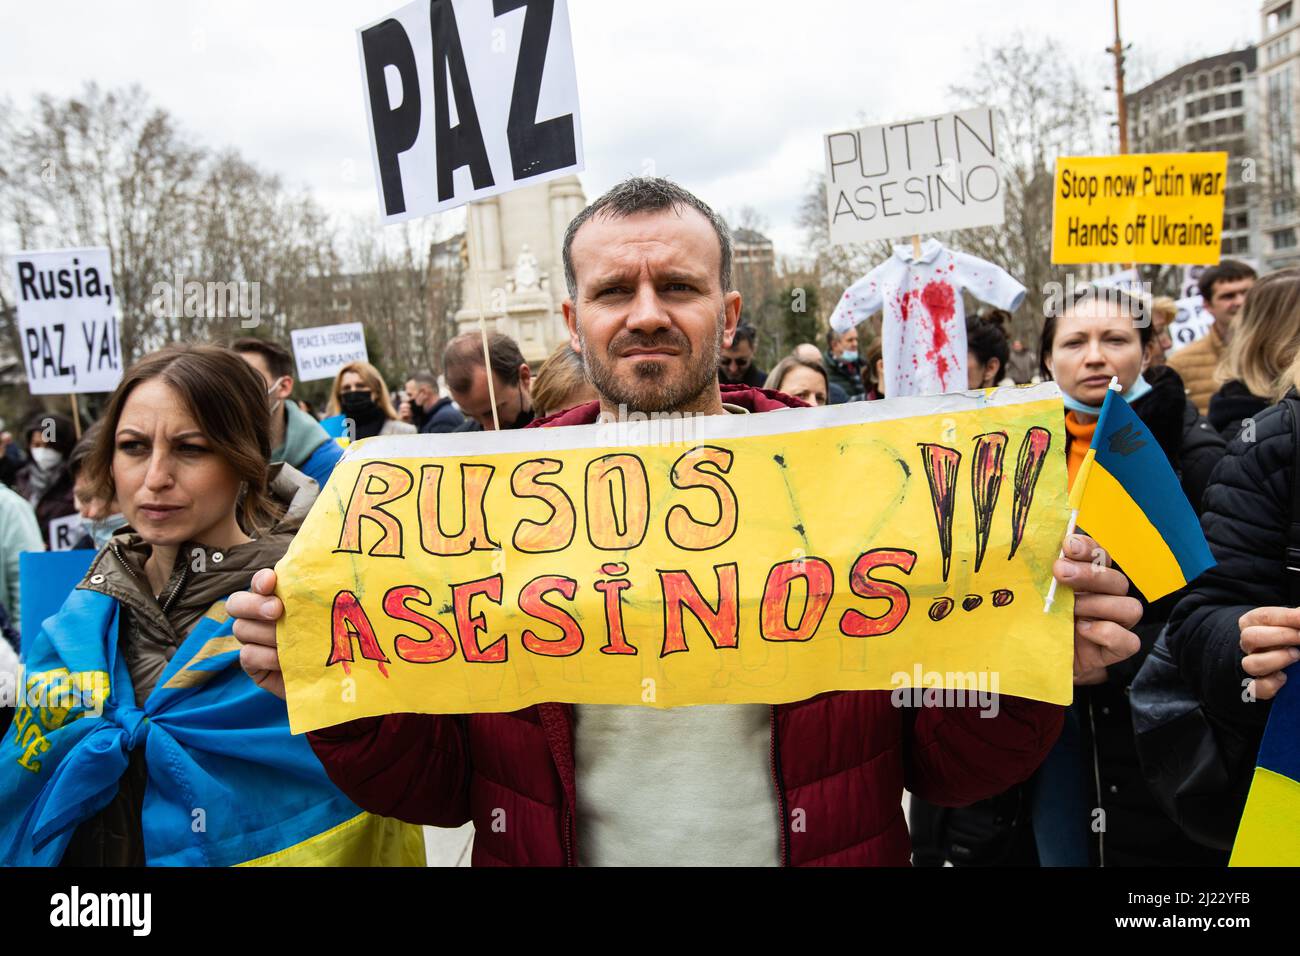 A man holds a sign that reads 'Killer Russians' during a protest against the war in Ukraine in Madrid, Spain Stock Photo